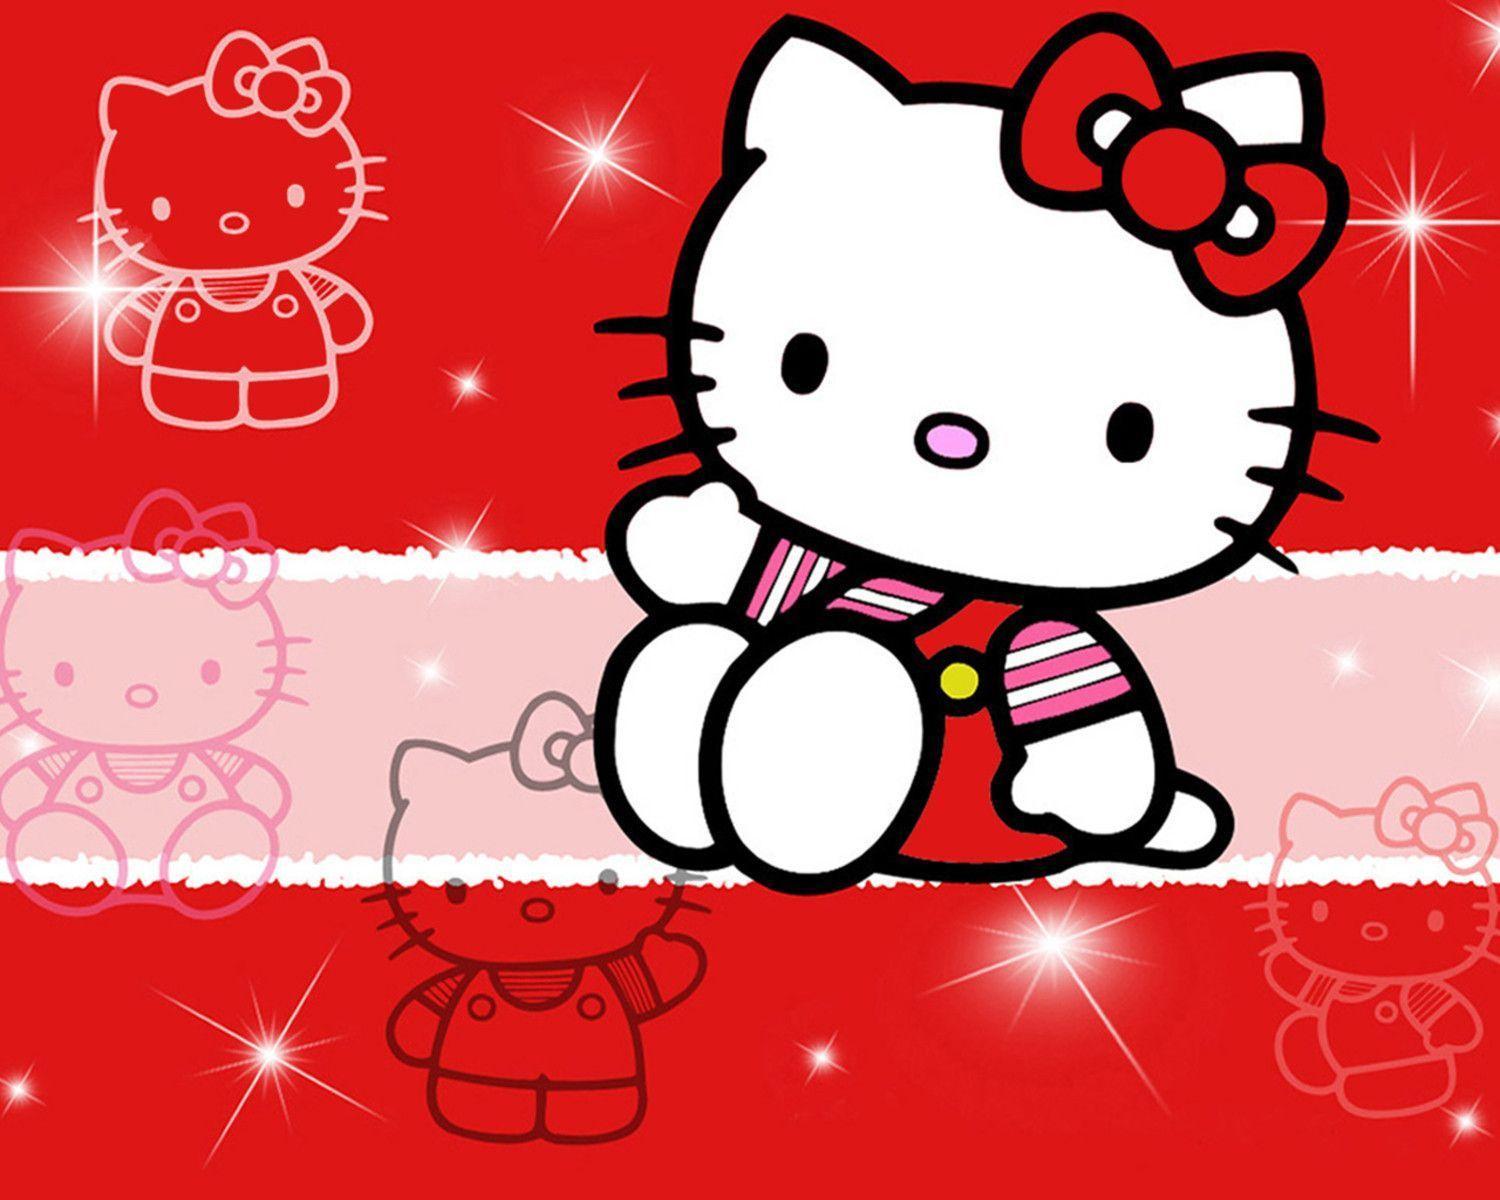 desktop wallpaper hello kitty. Best Web For quotes, facts, memes